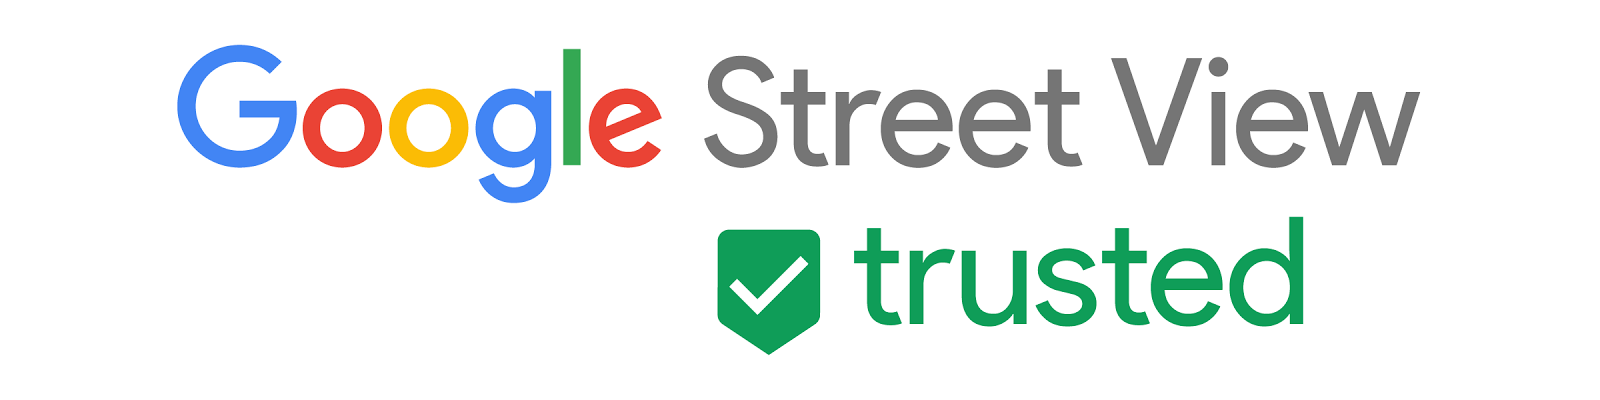 Hire A Google Street View Trusted Pro Today